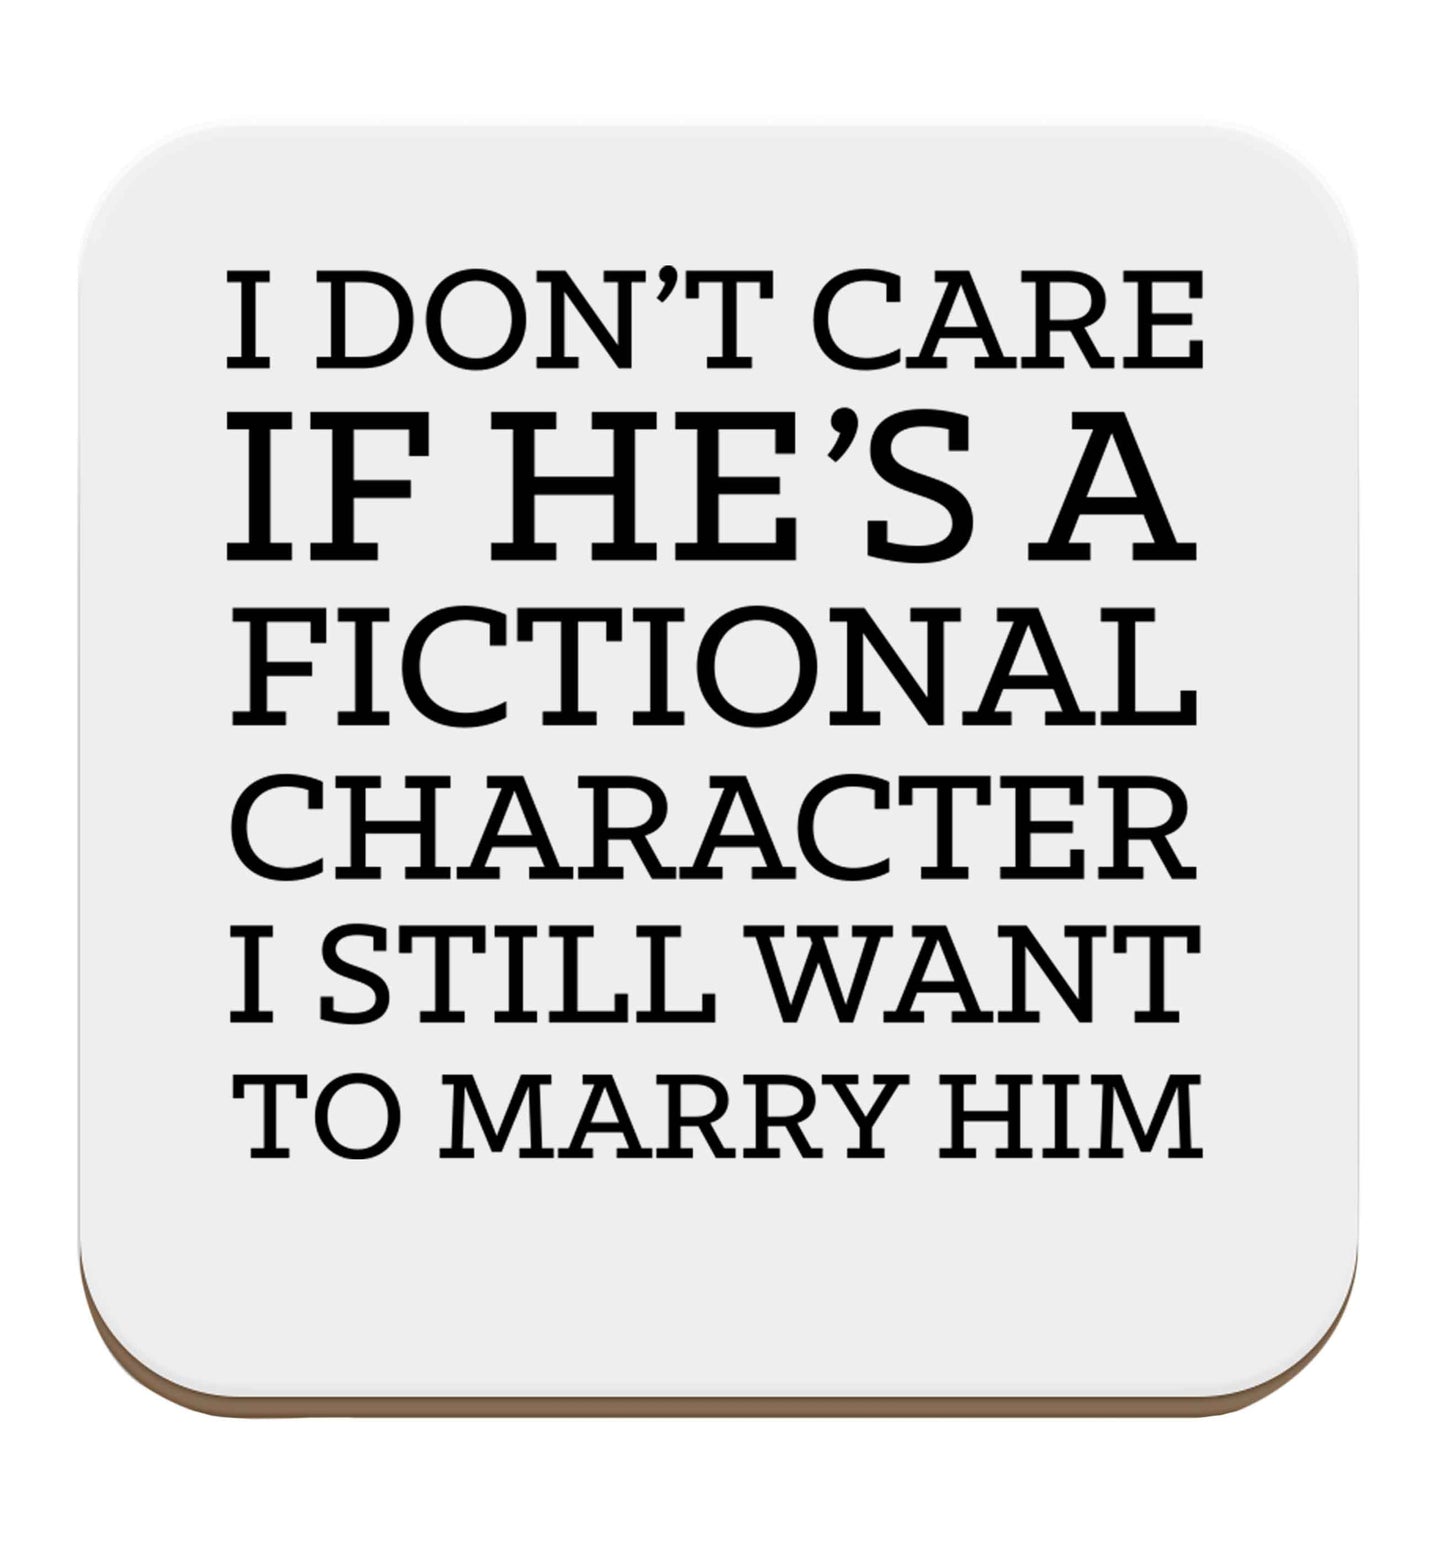 I don't care if he's a fictional character I still want to marry him set of four coasters